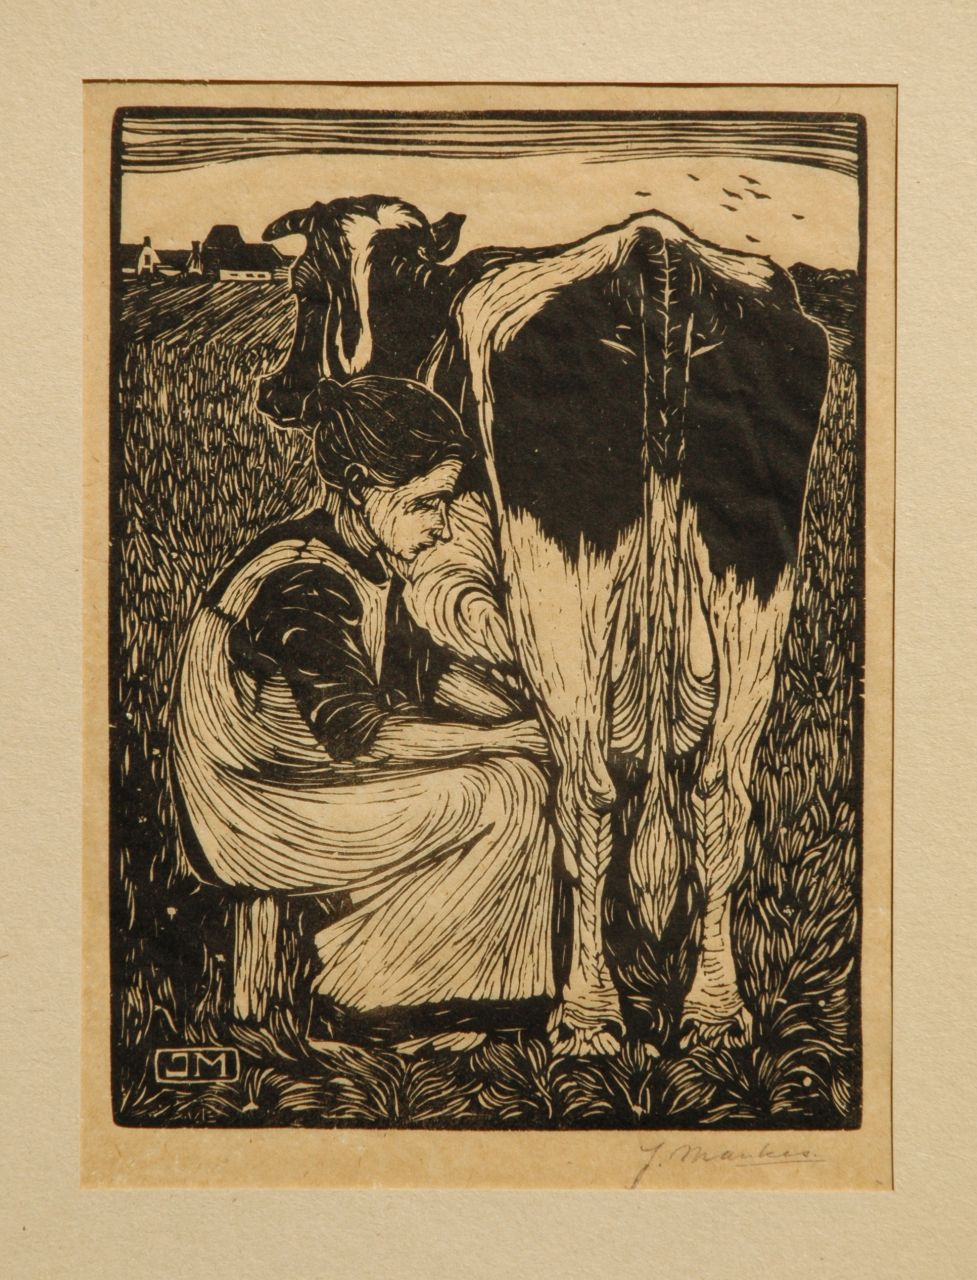 Mankes J.  | Jan Mankes, Milking a cow, Holzstich auf Papier 19,2 x 14,2 cm, signed with mon in the block and l.r. in full (in pencil) und executed in 1914